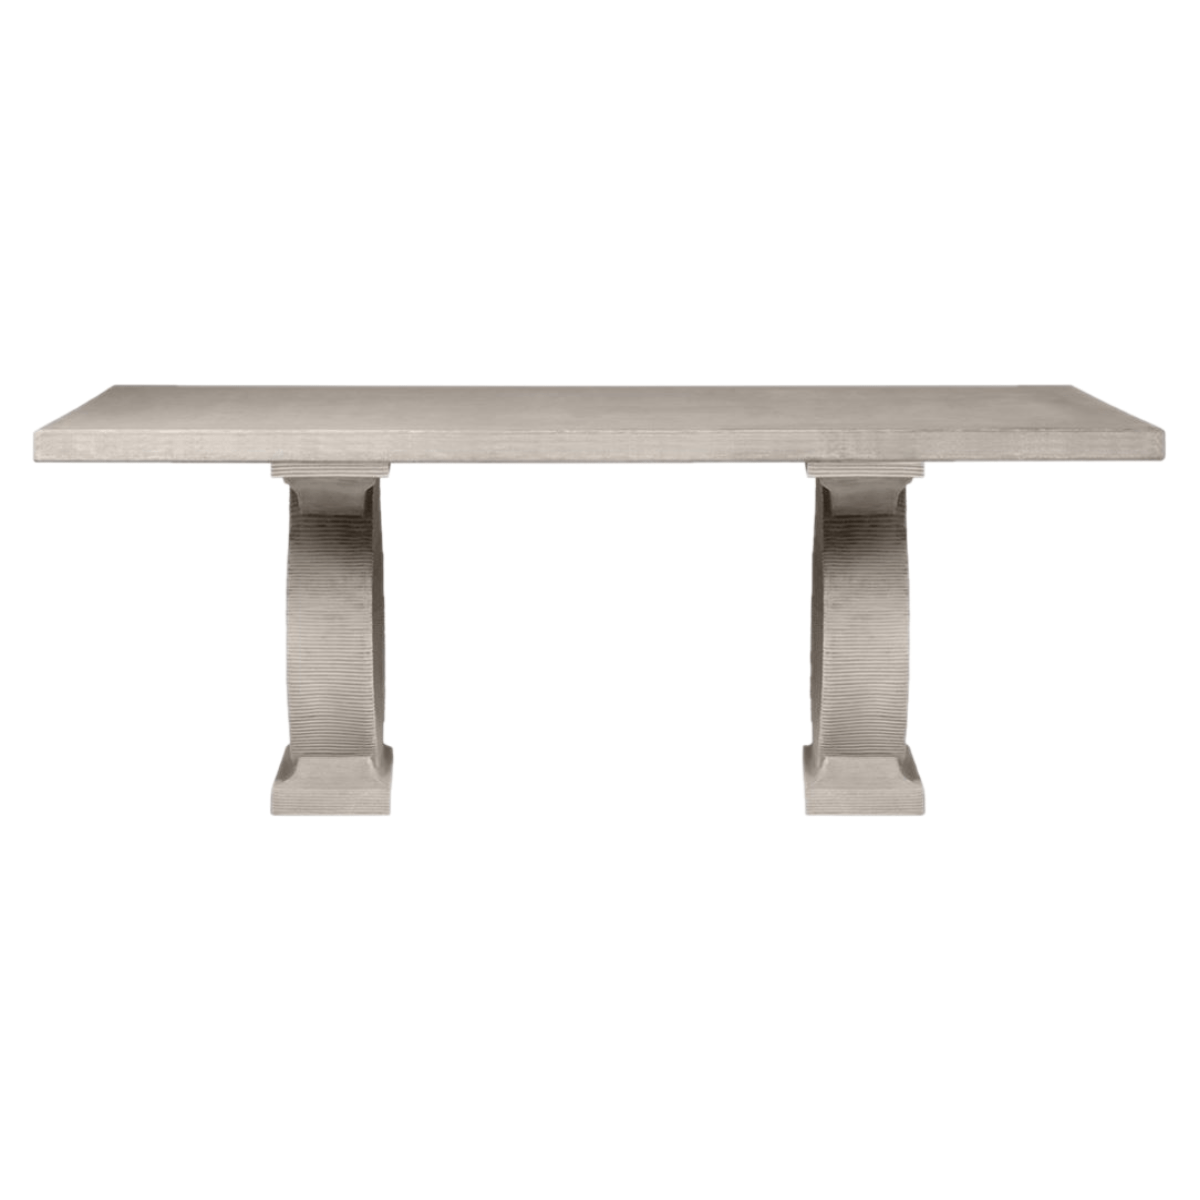 Made Goods Grier Outdoor Dining Table - Gray Furniture